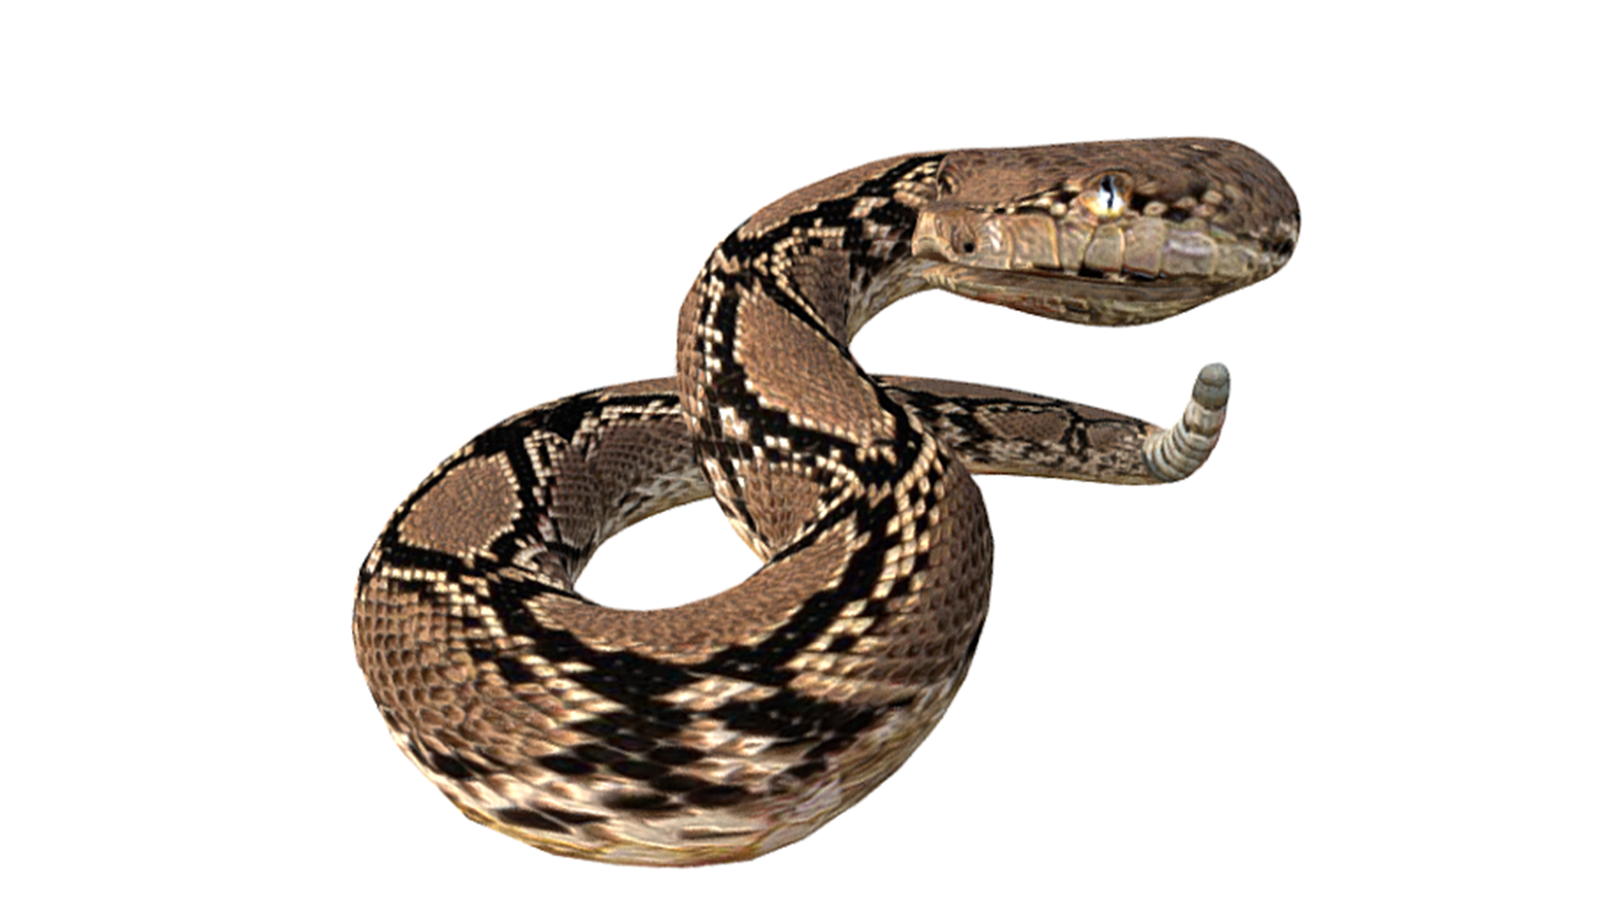 Mesmerizing Rattlesnake 3D Model: Perfect for Educational Resources and Visual Projects